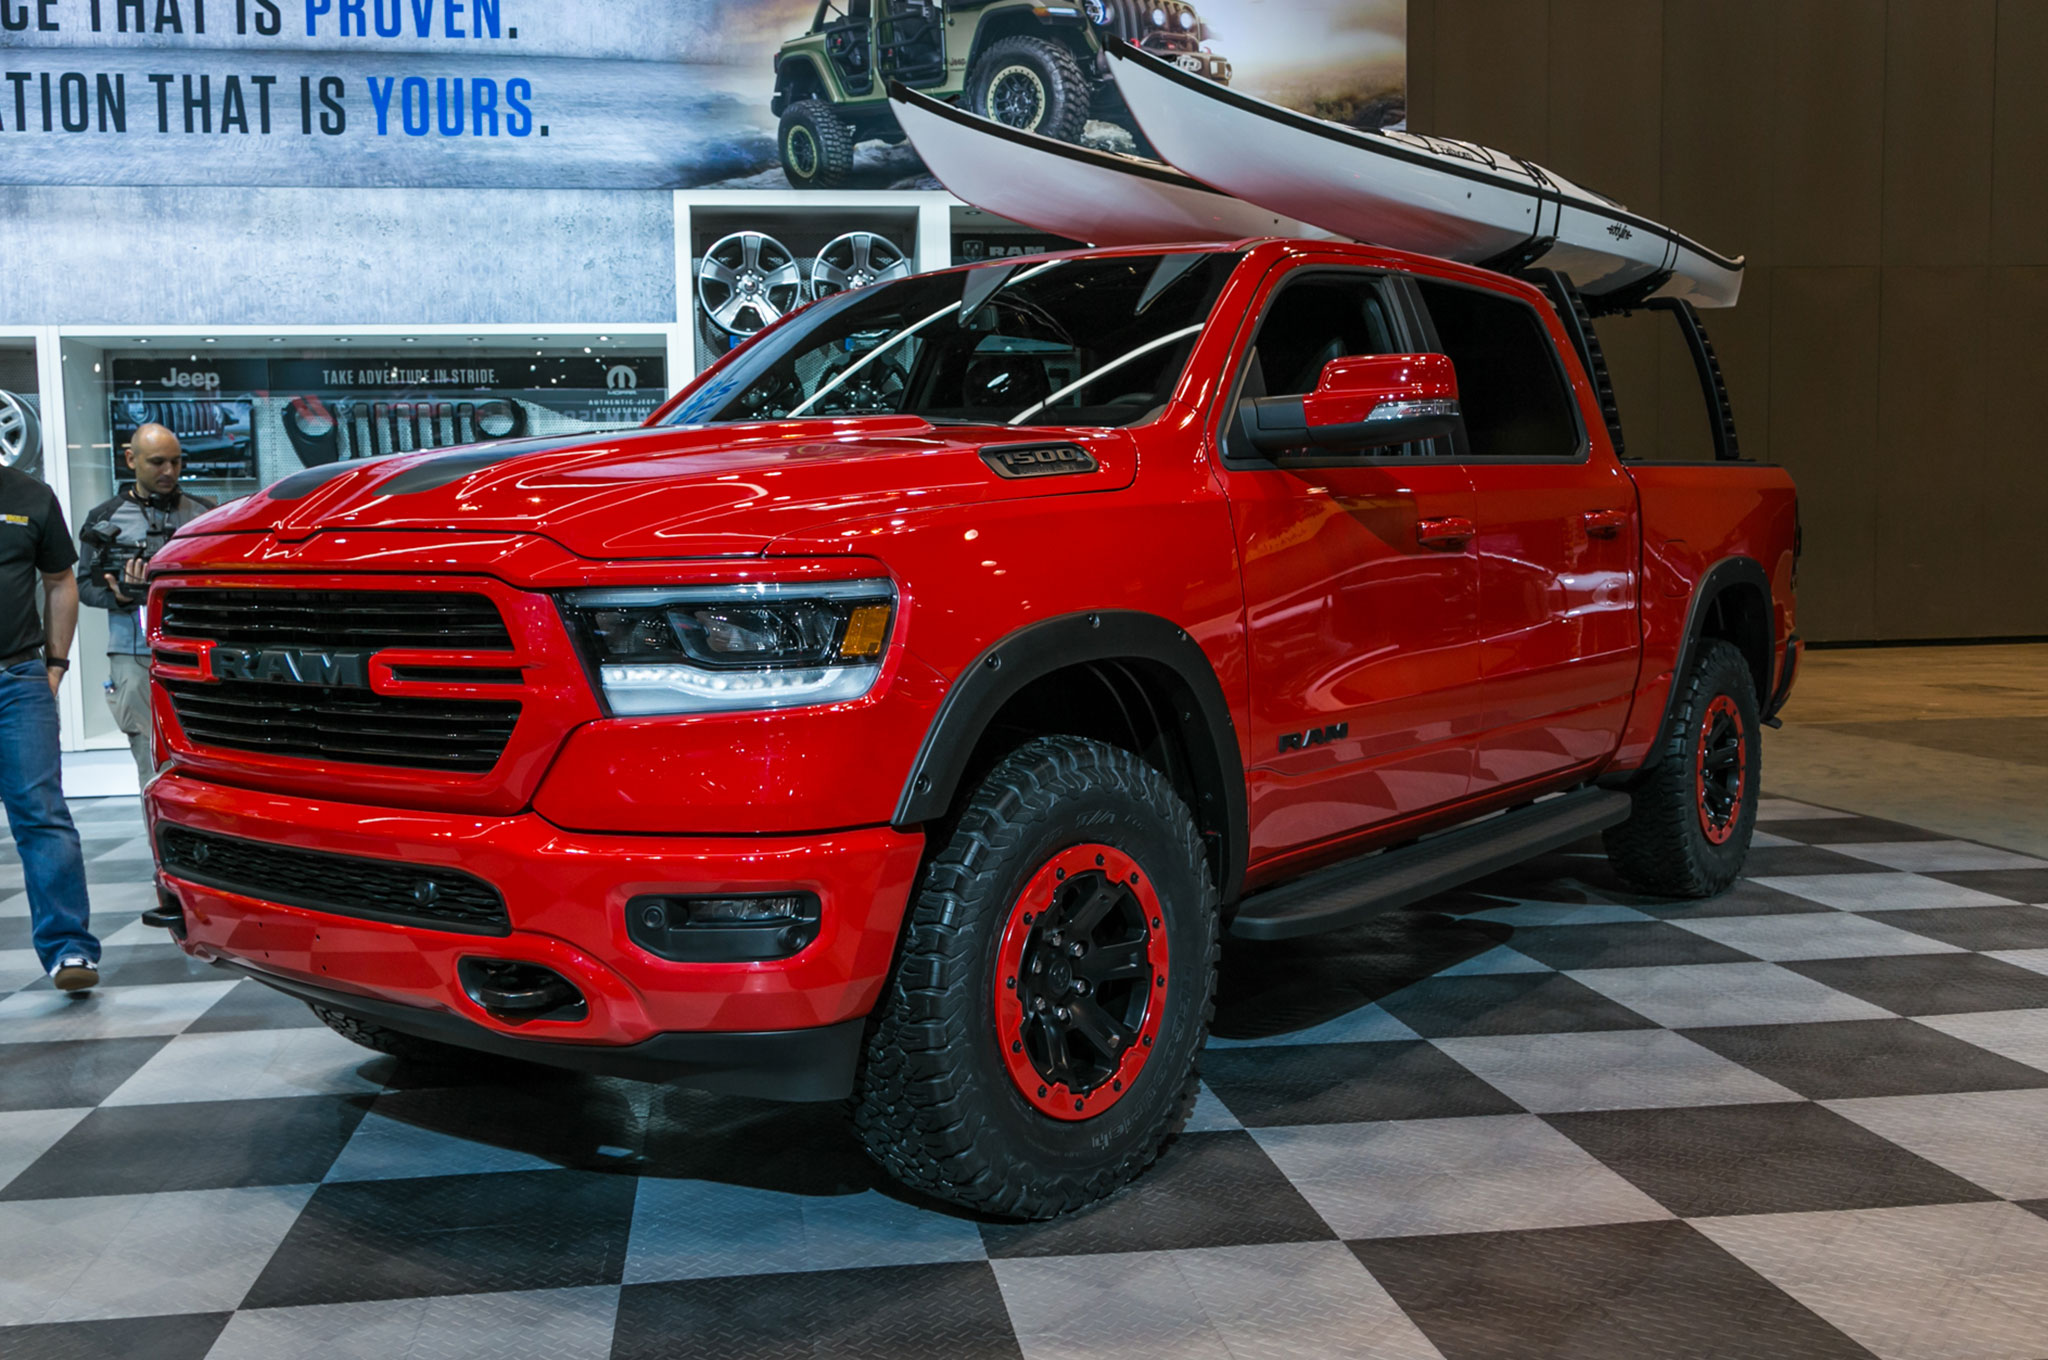 2019-Ram-1500-with-Mopar-Accessories-front-side-view.jpg